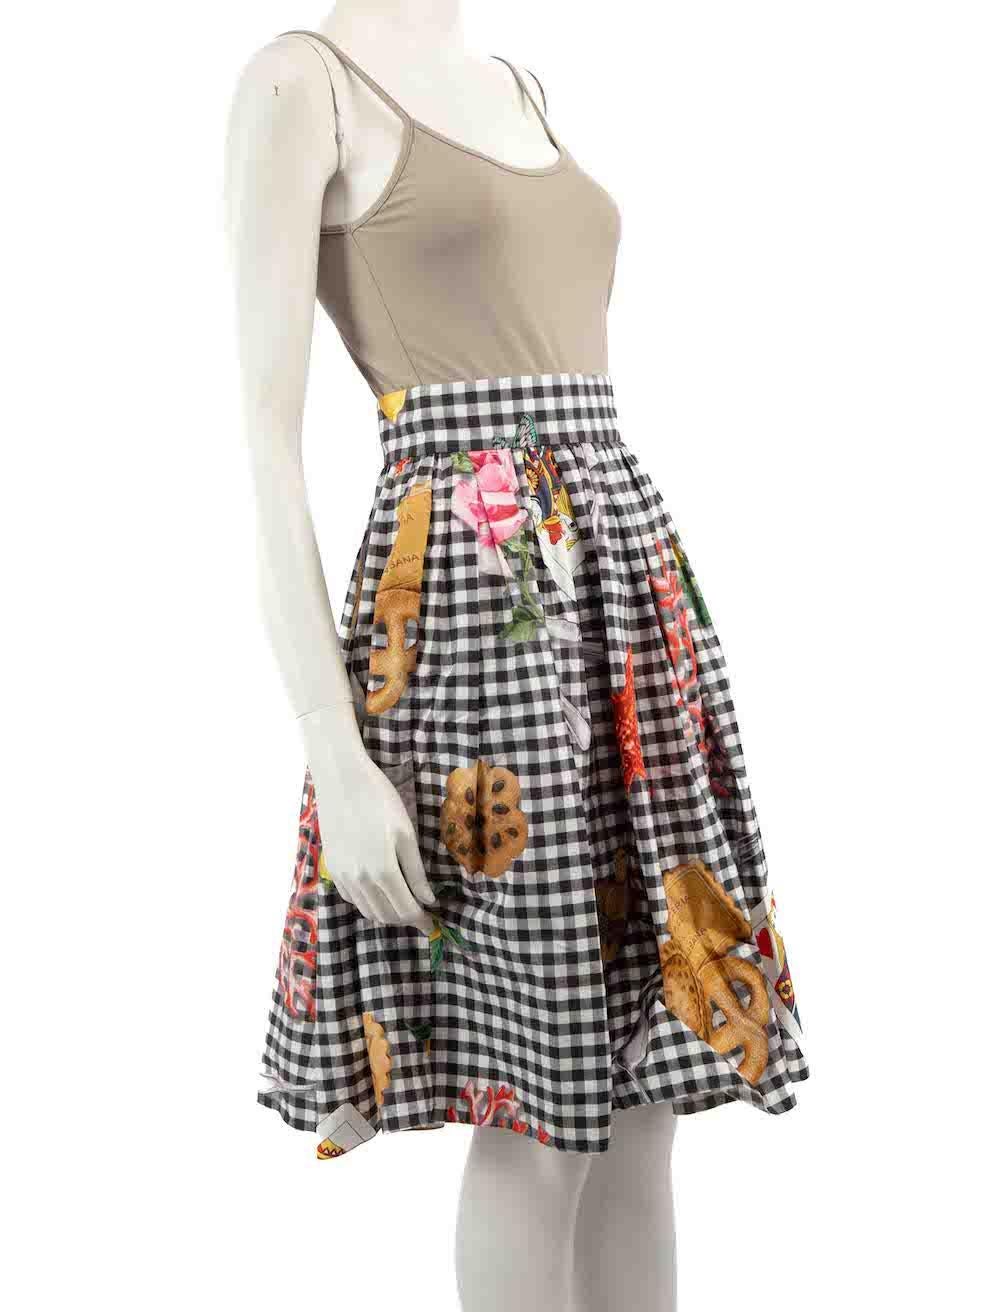 CONDITION is Never worn, with tags. No visible wear to skirt is evident on this new Dolce & Gabbana designer resale item.
 
 
 
 Details
 
 
 Multicolour
 
 Cotton
 
 Skirt
 
 Gingham and picnic print
 
 Midi
 
 Gathered
 
 Back button, snap button